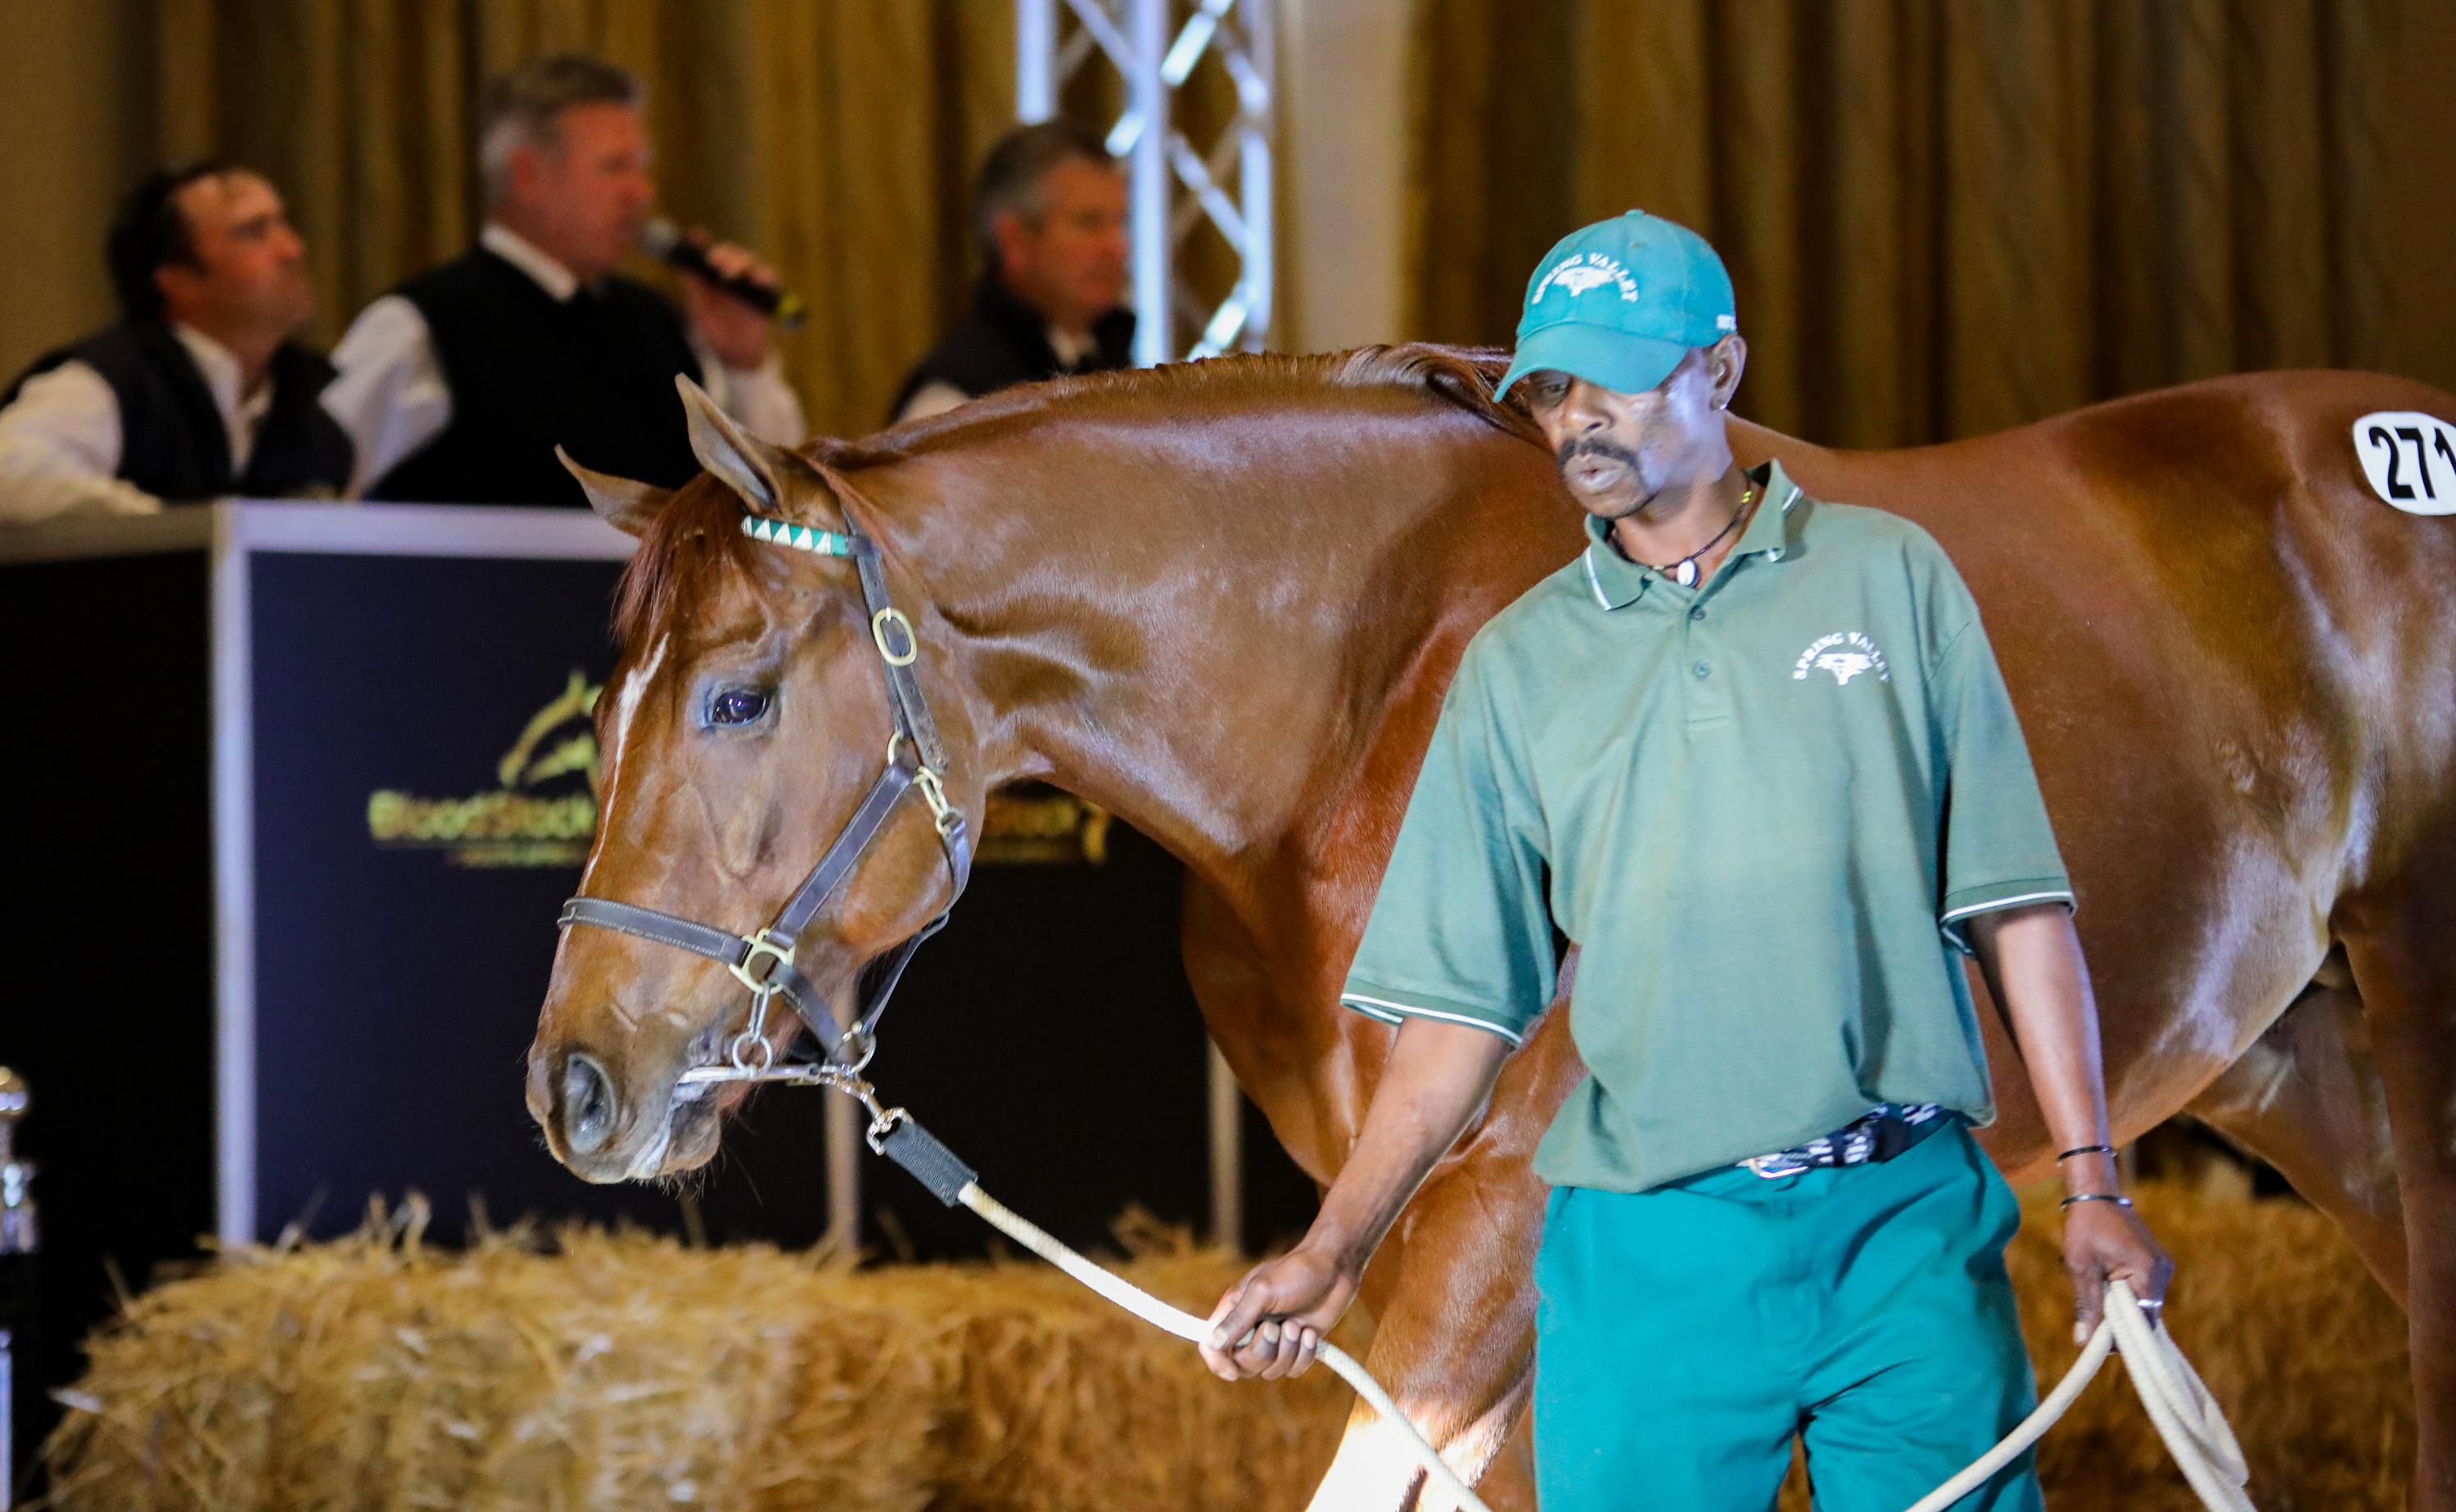 Futura Colt Tops #kznbreds At Day 2 Of KZN Yearling Sale